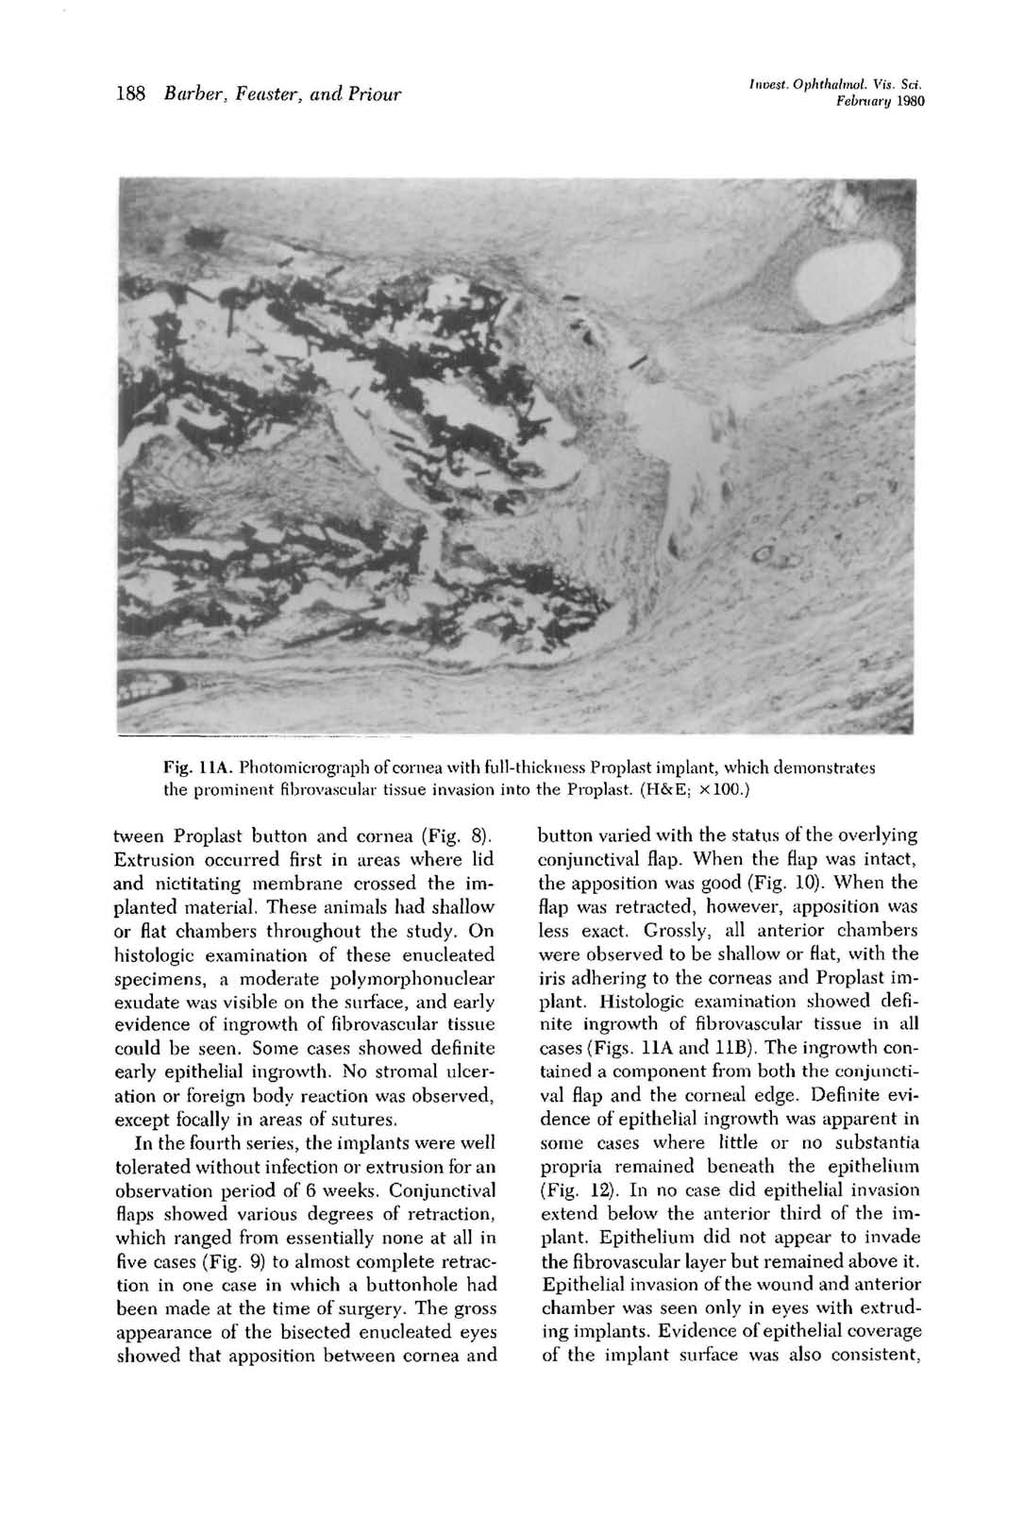 188 Barber, Feasier, and Priour Invest. Ophthalmol. Vis. Sci. February 1980 Fig. 11A.